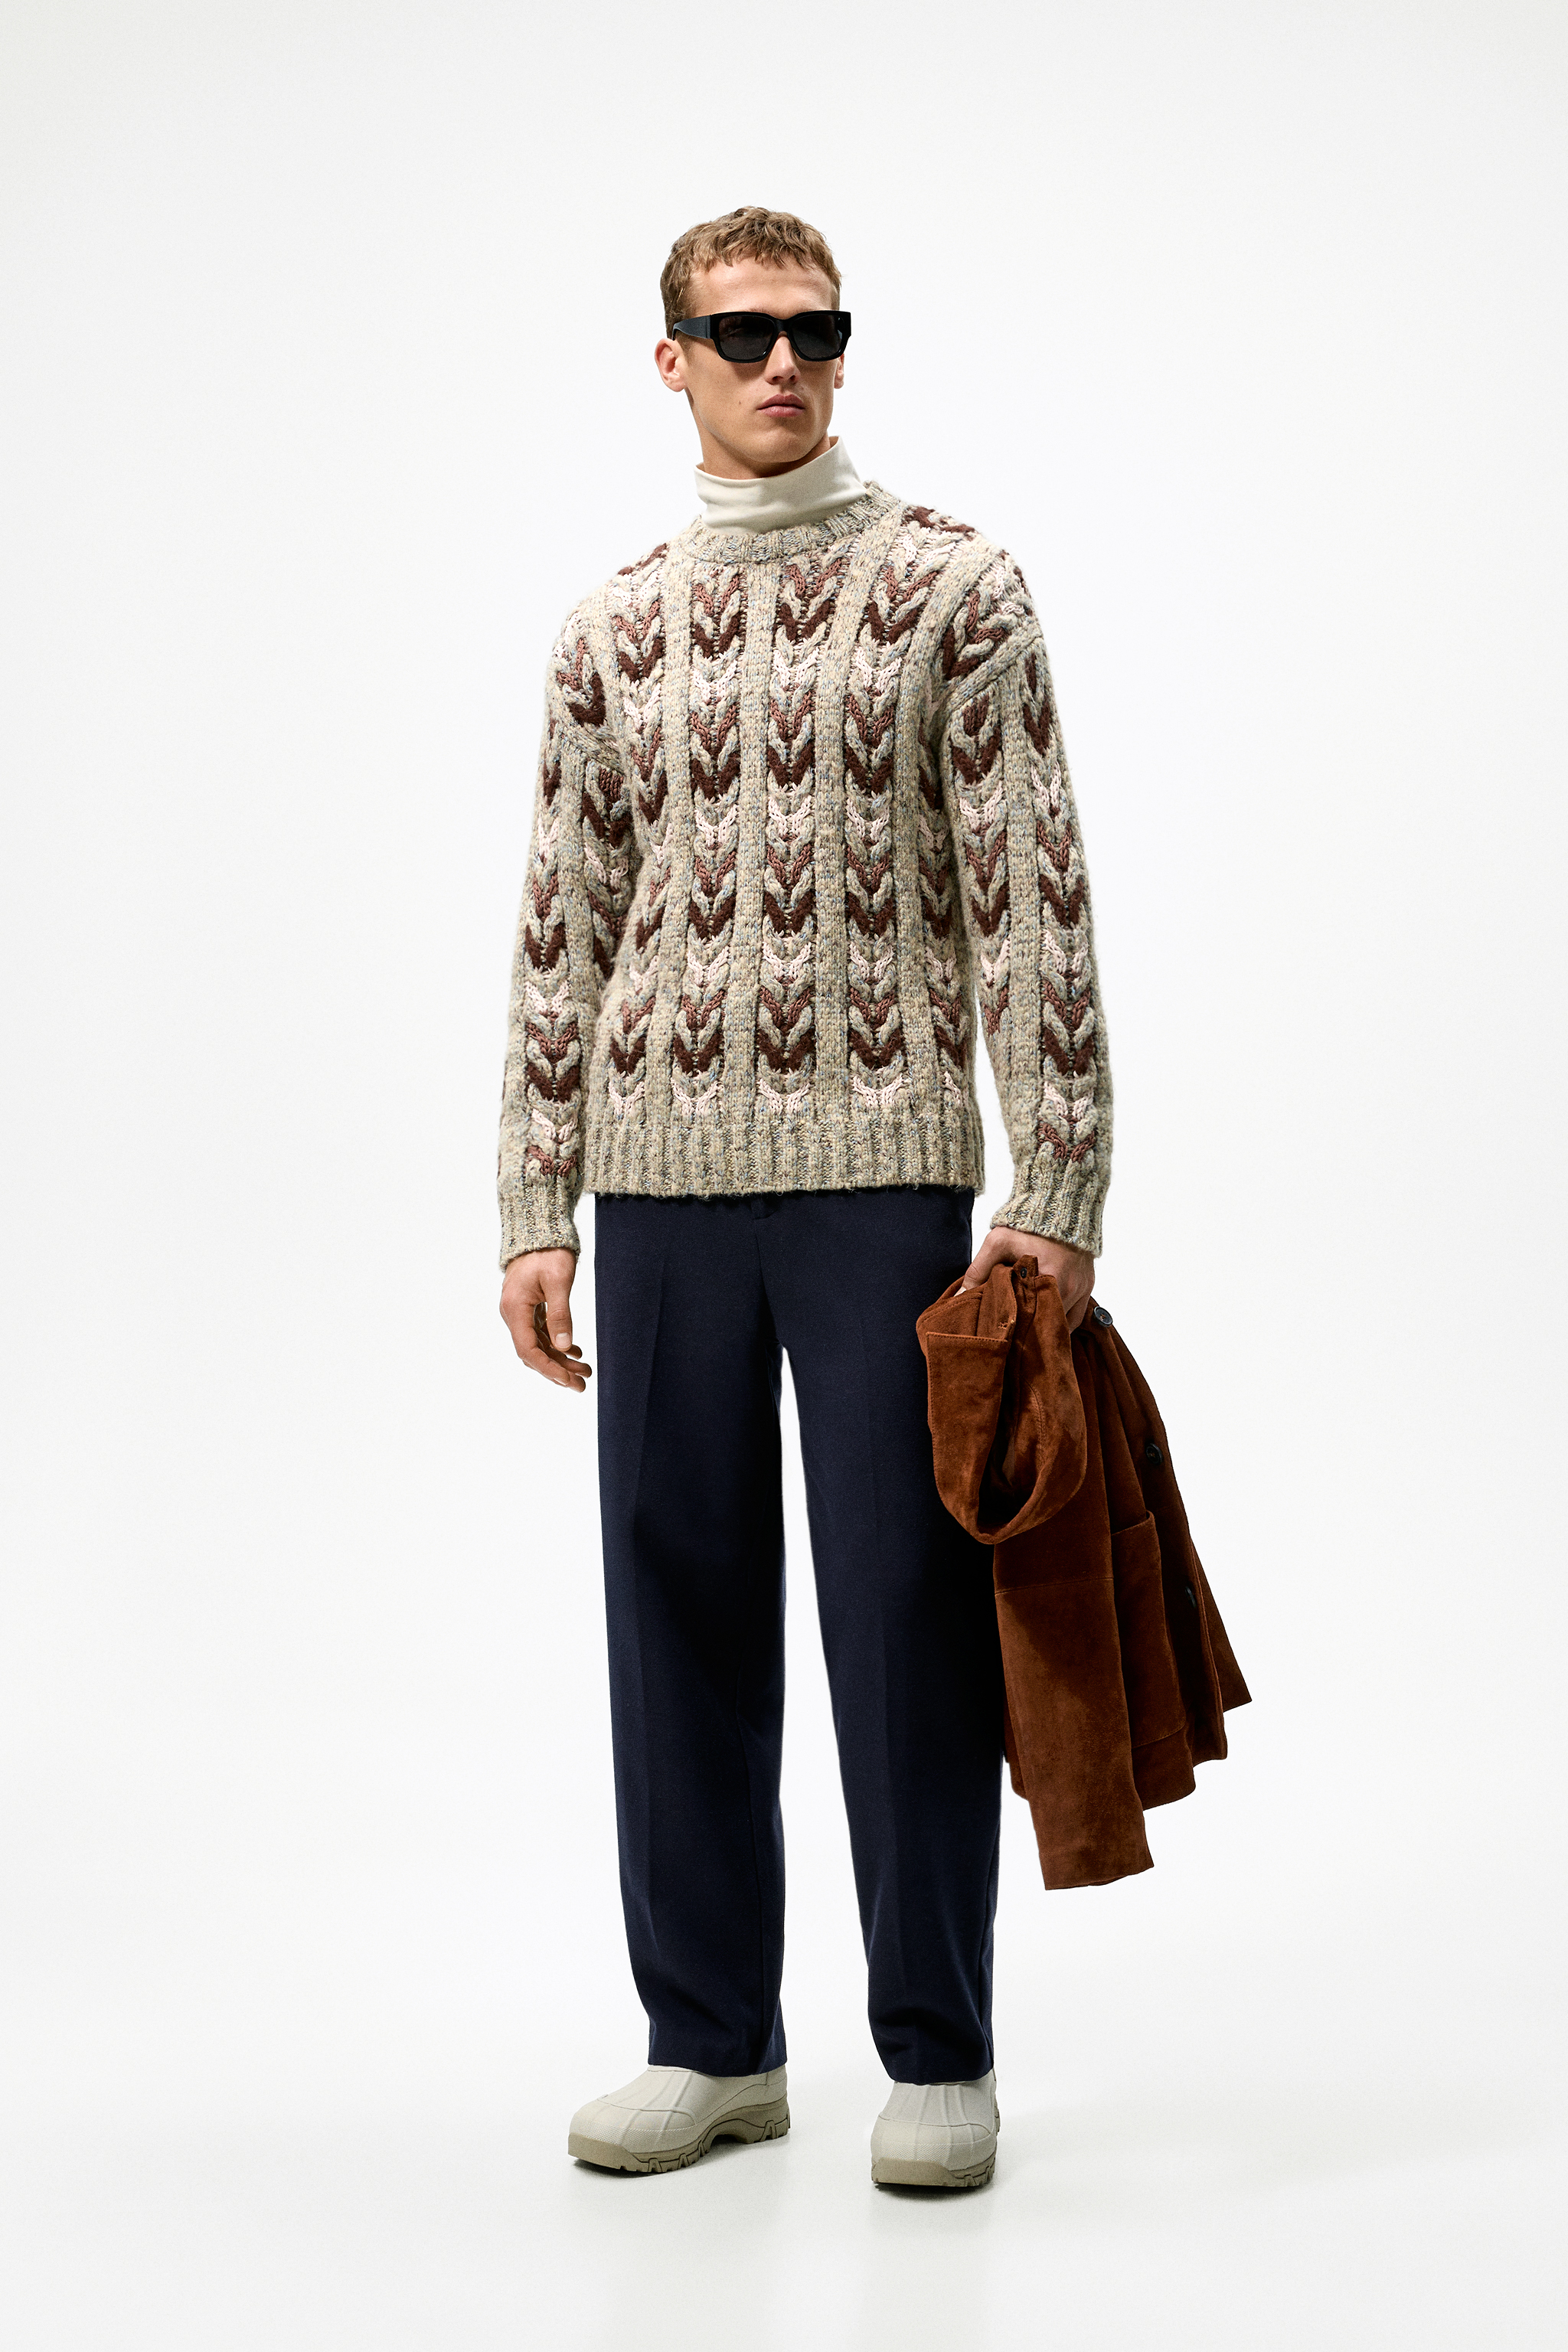 Zara TEXTURED CABLE KNIT SWEATER